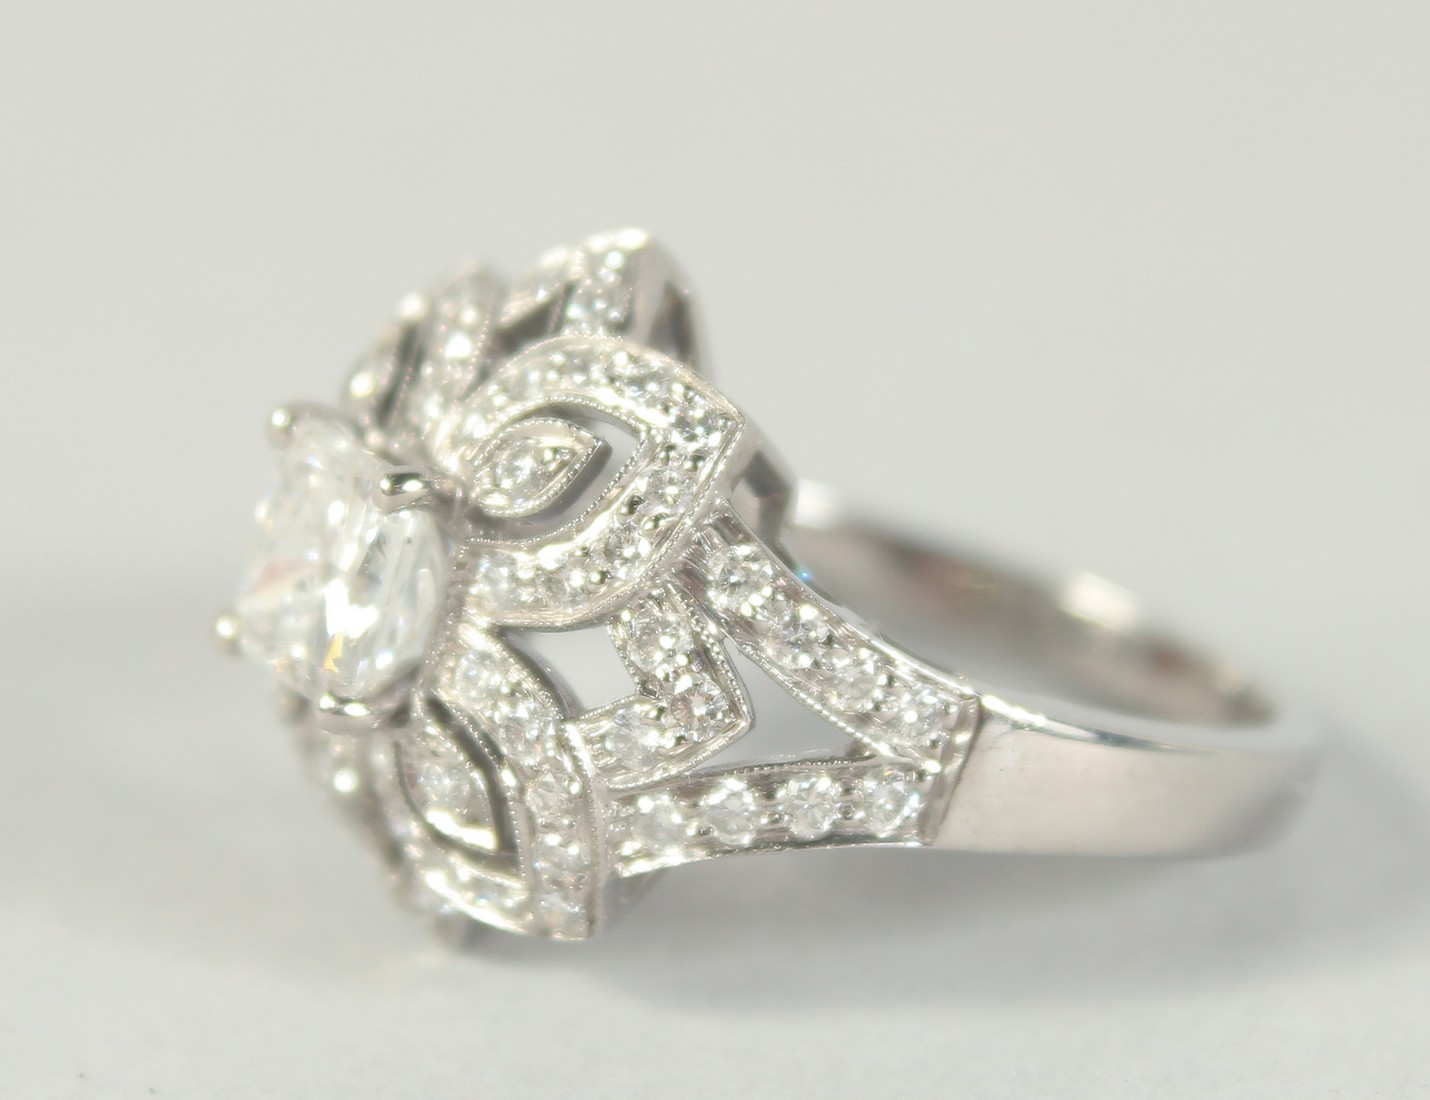 A GOOD 18CT WHITE GOLD DIAMOND COCKTAIL RING. - Image 2 of 5